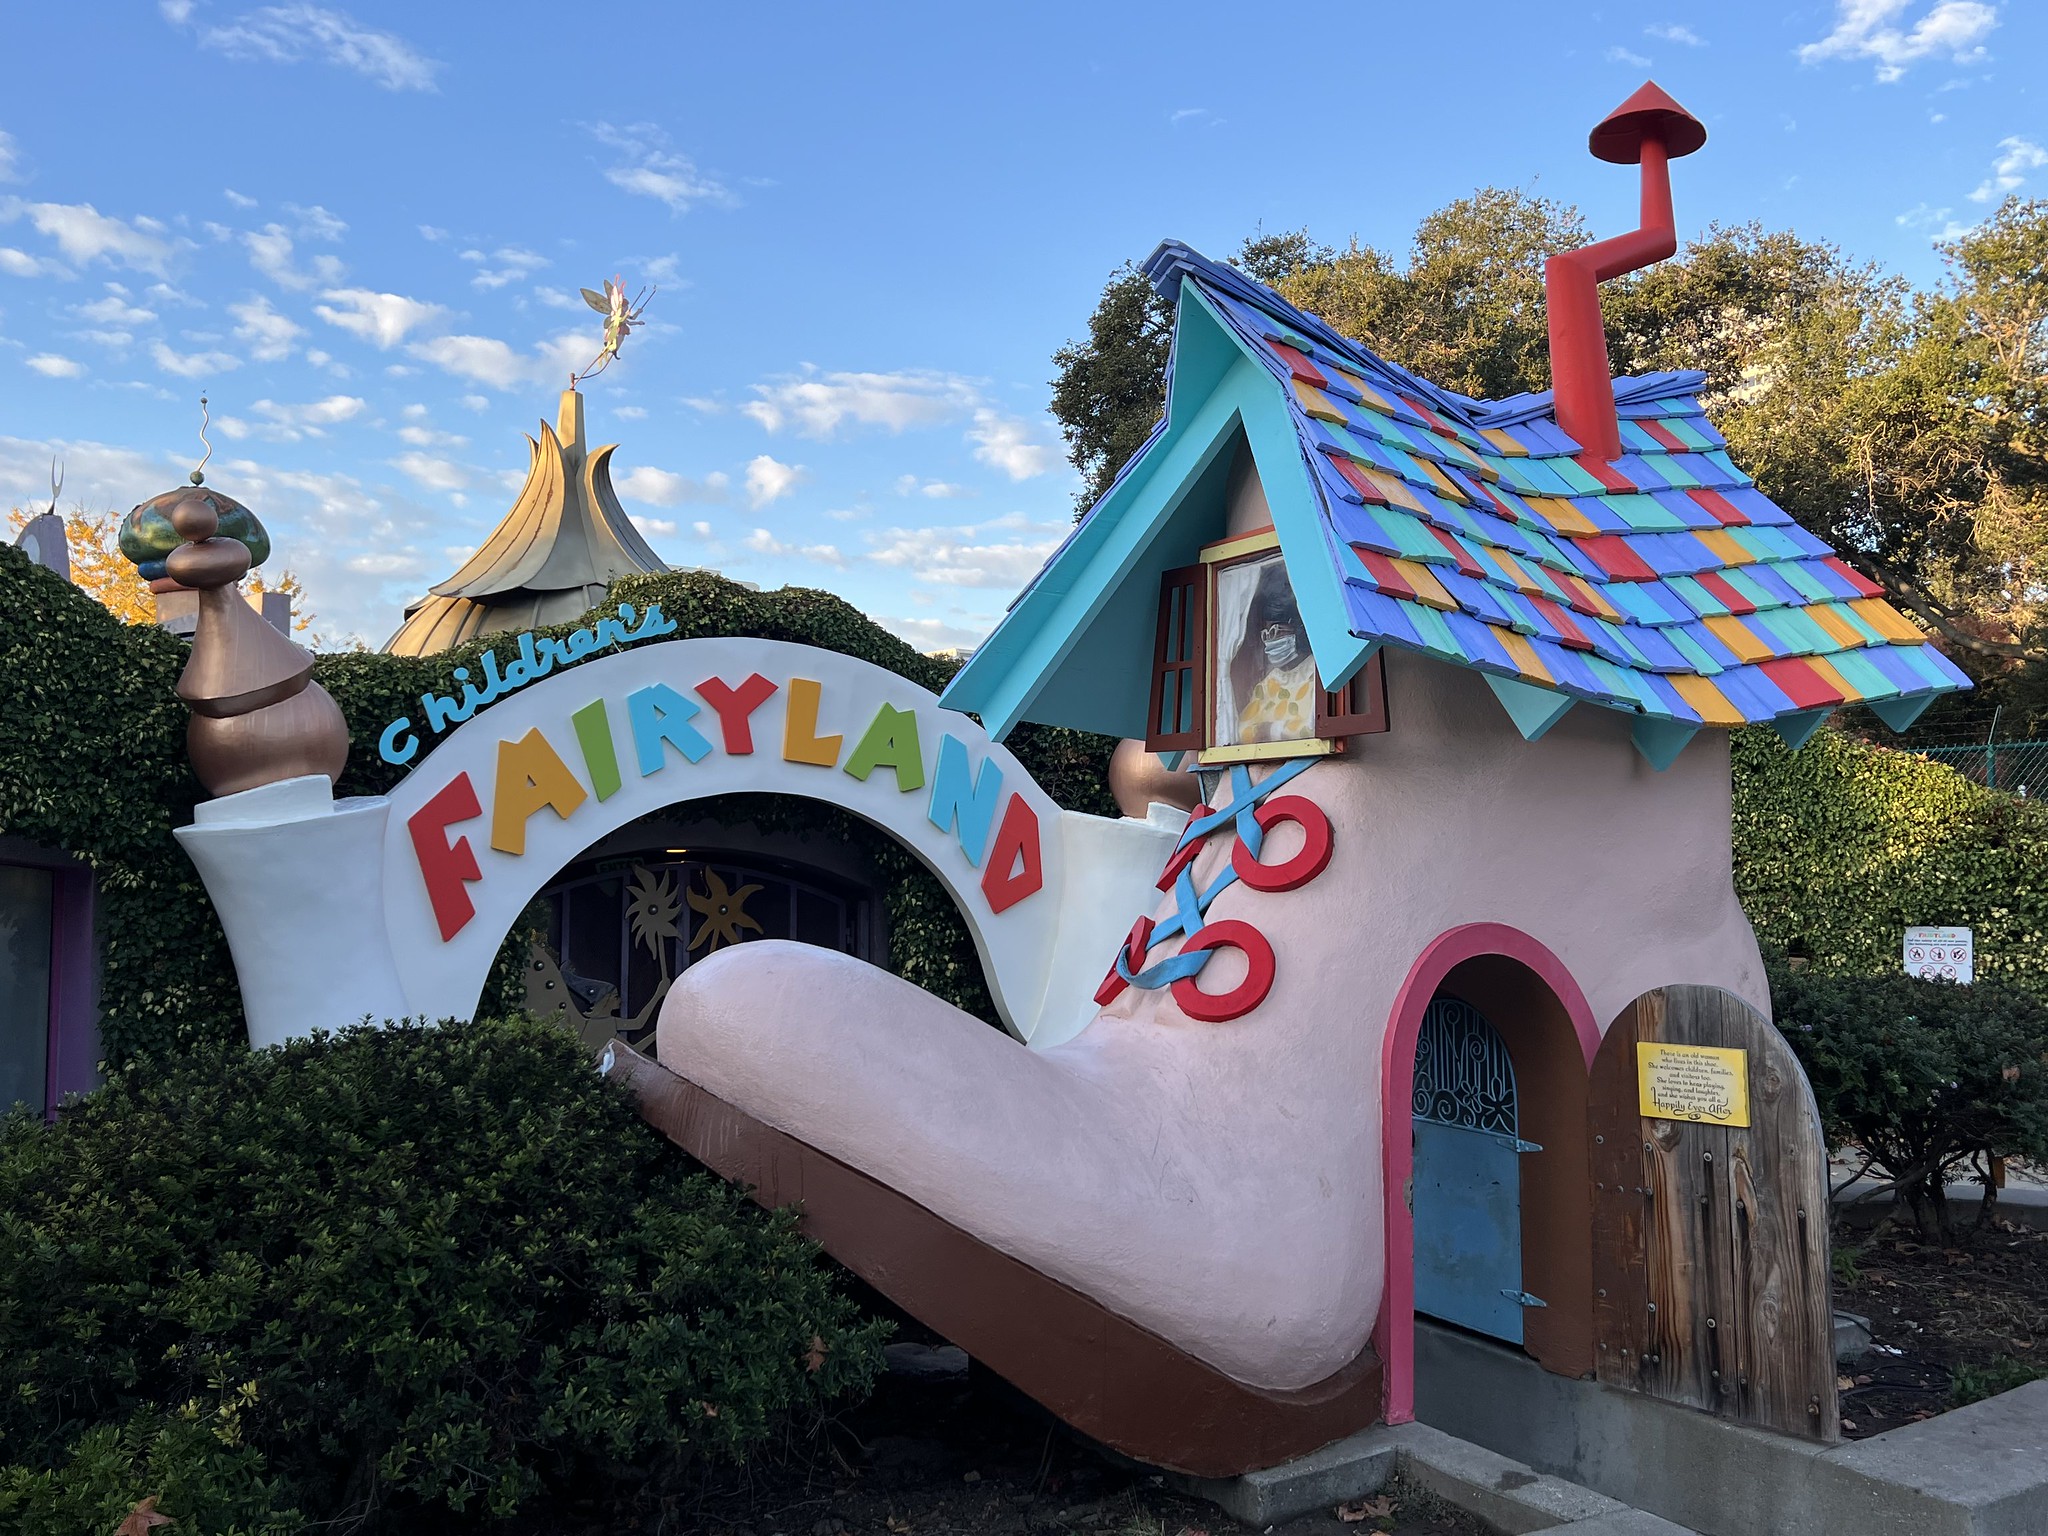 A giant pink shoe with a doorway and multicolor roof tiles says "Fairyland."